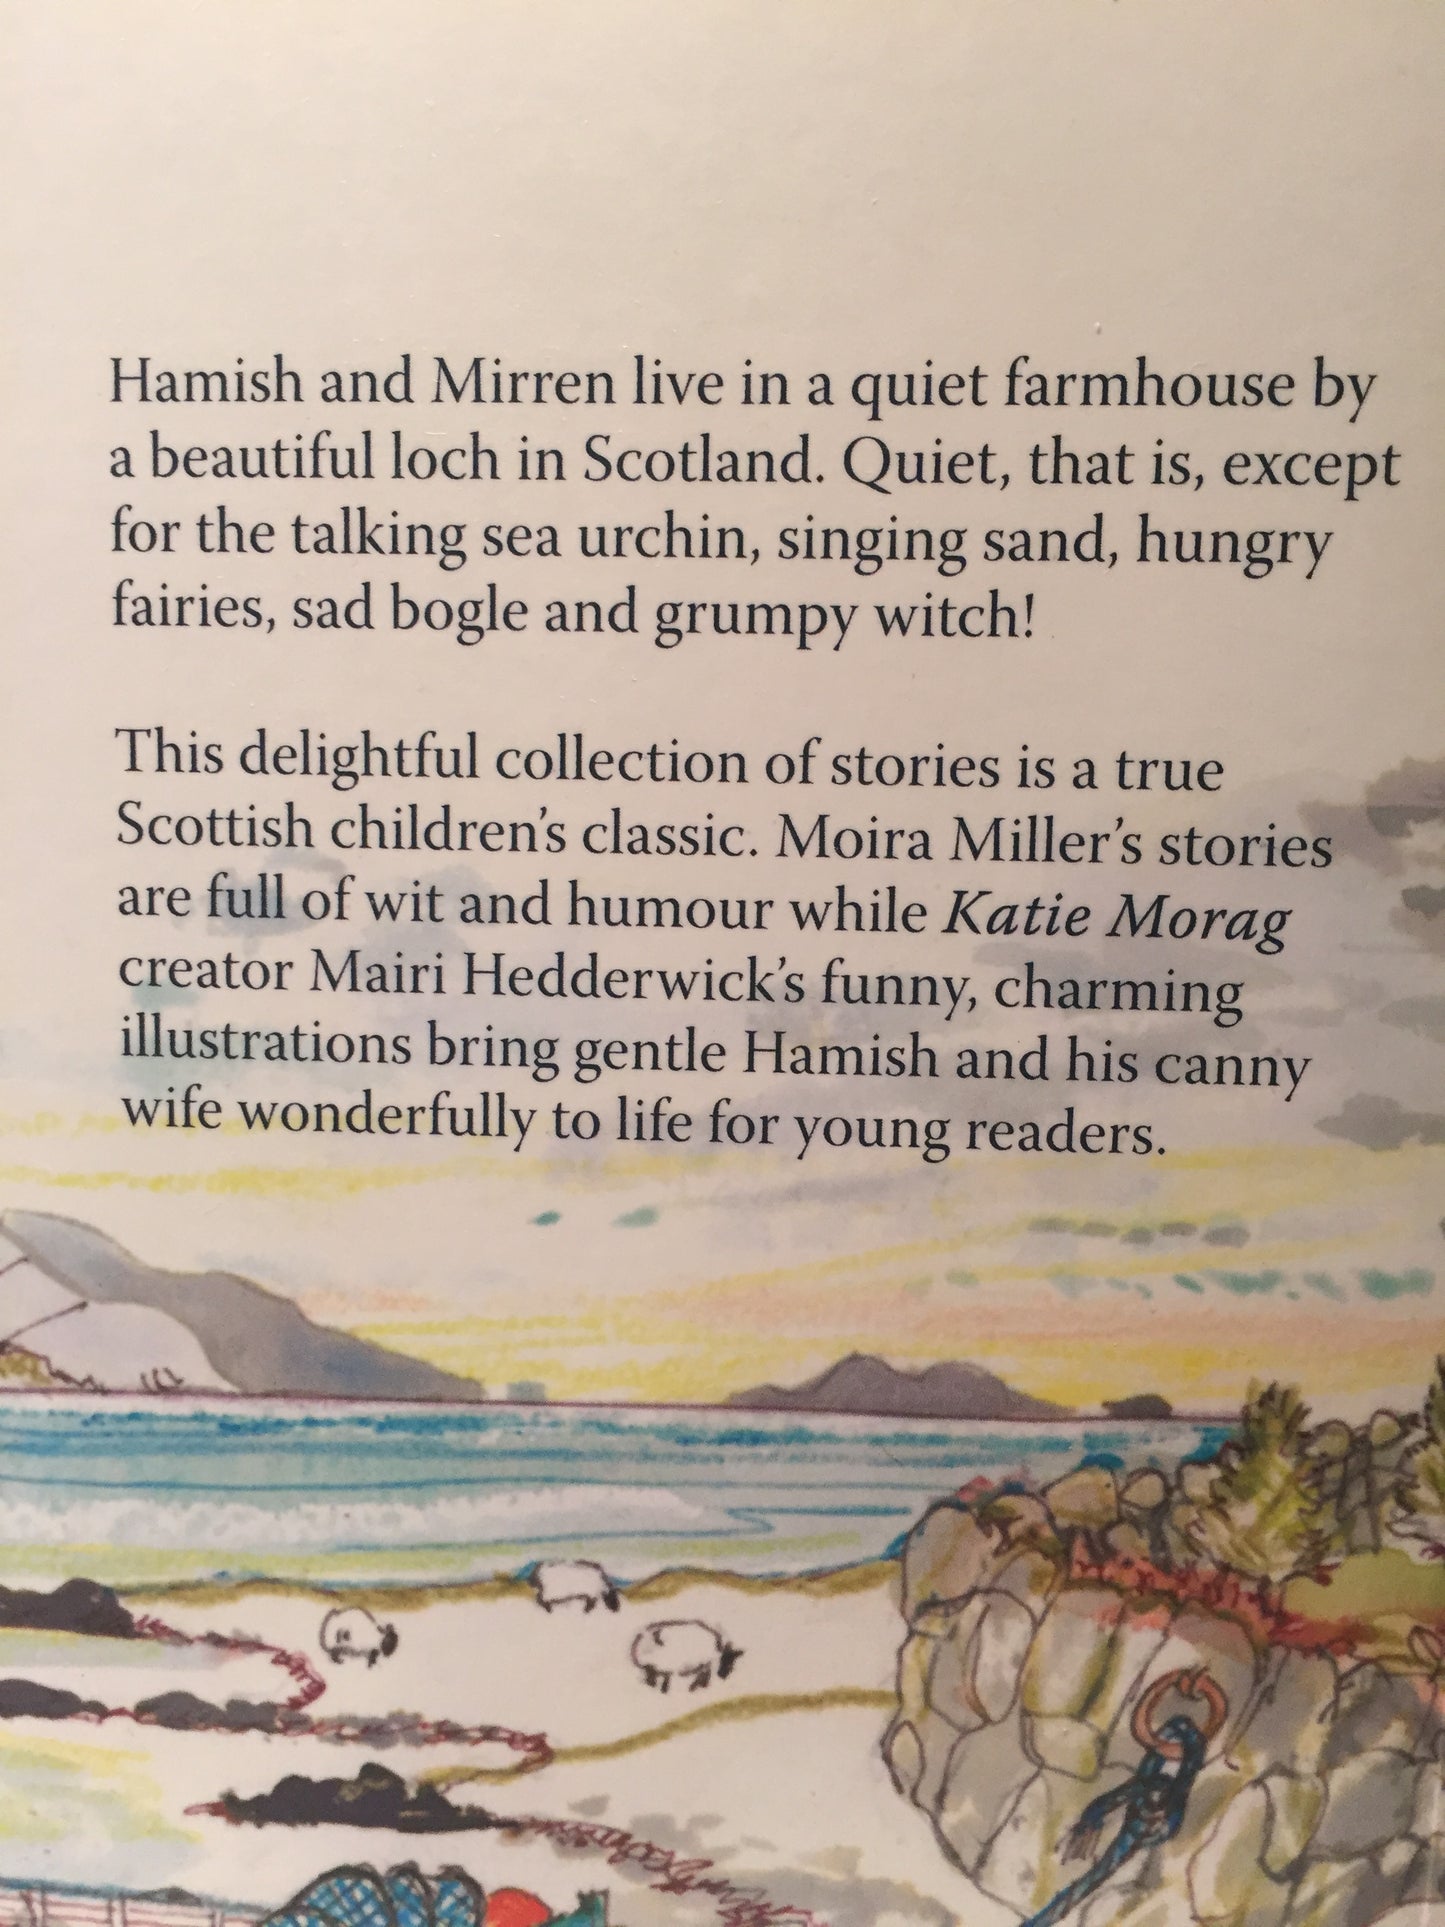 Chapter Book for Young Readers - THE ADVENTURES OF HAMISH AND MIRREN